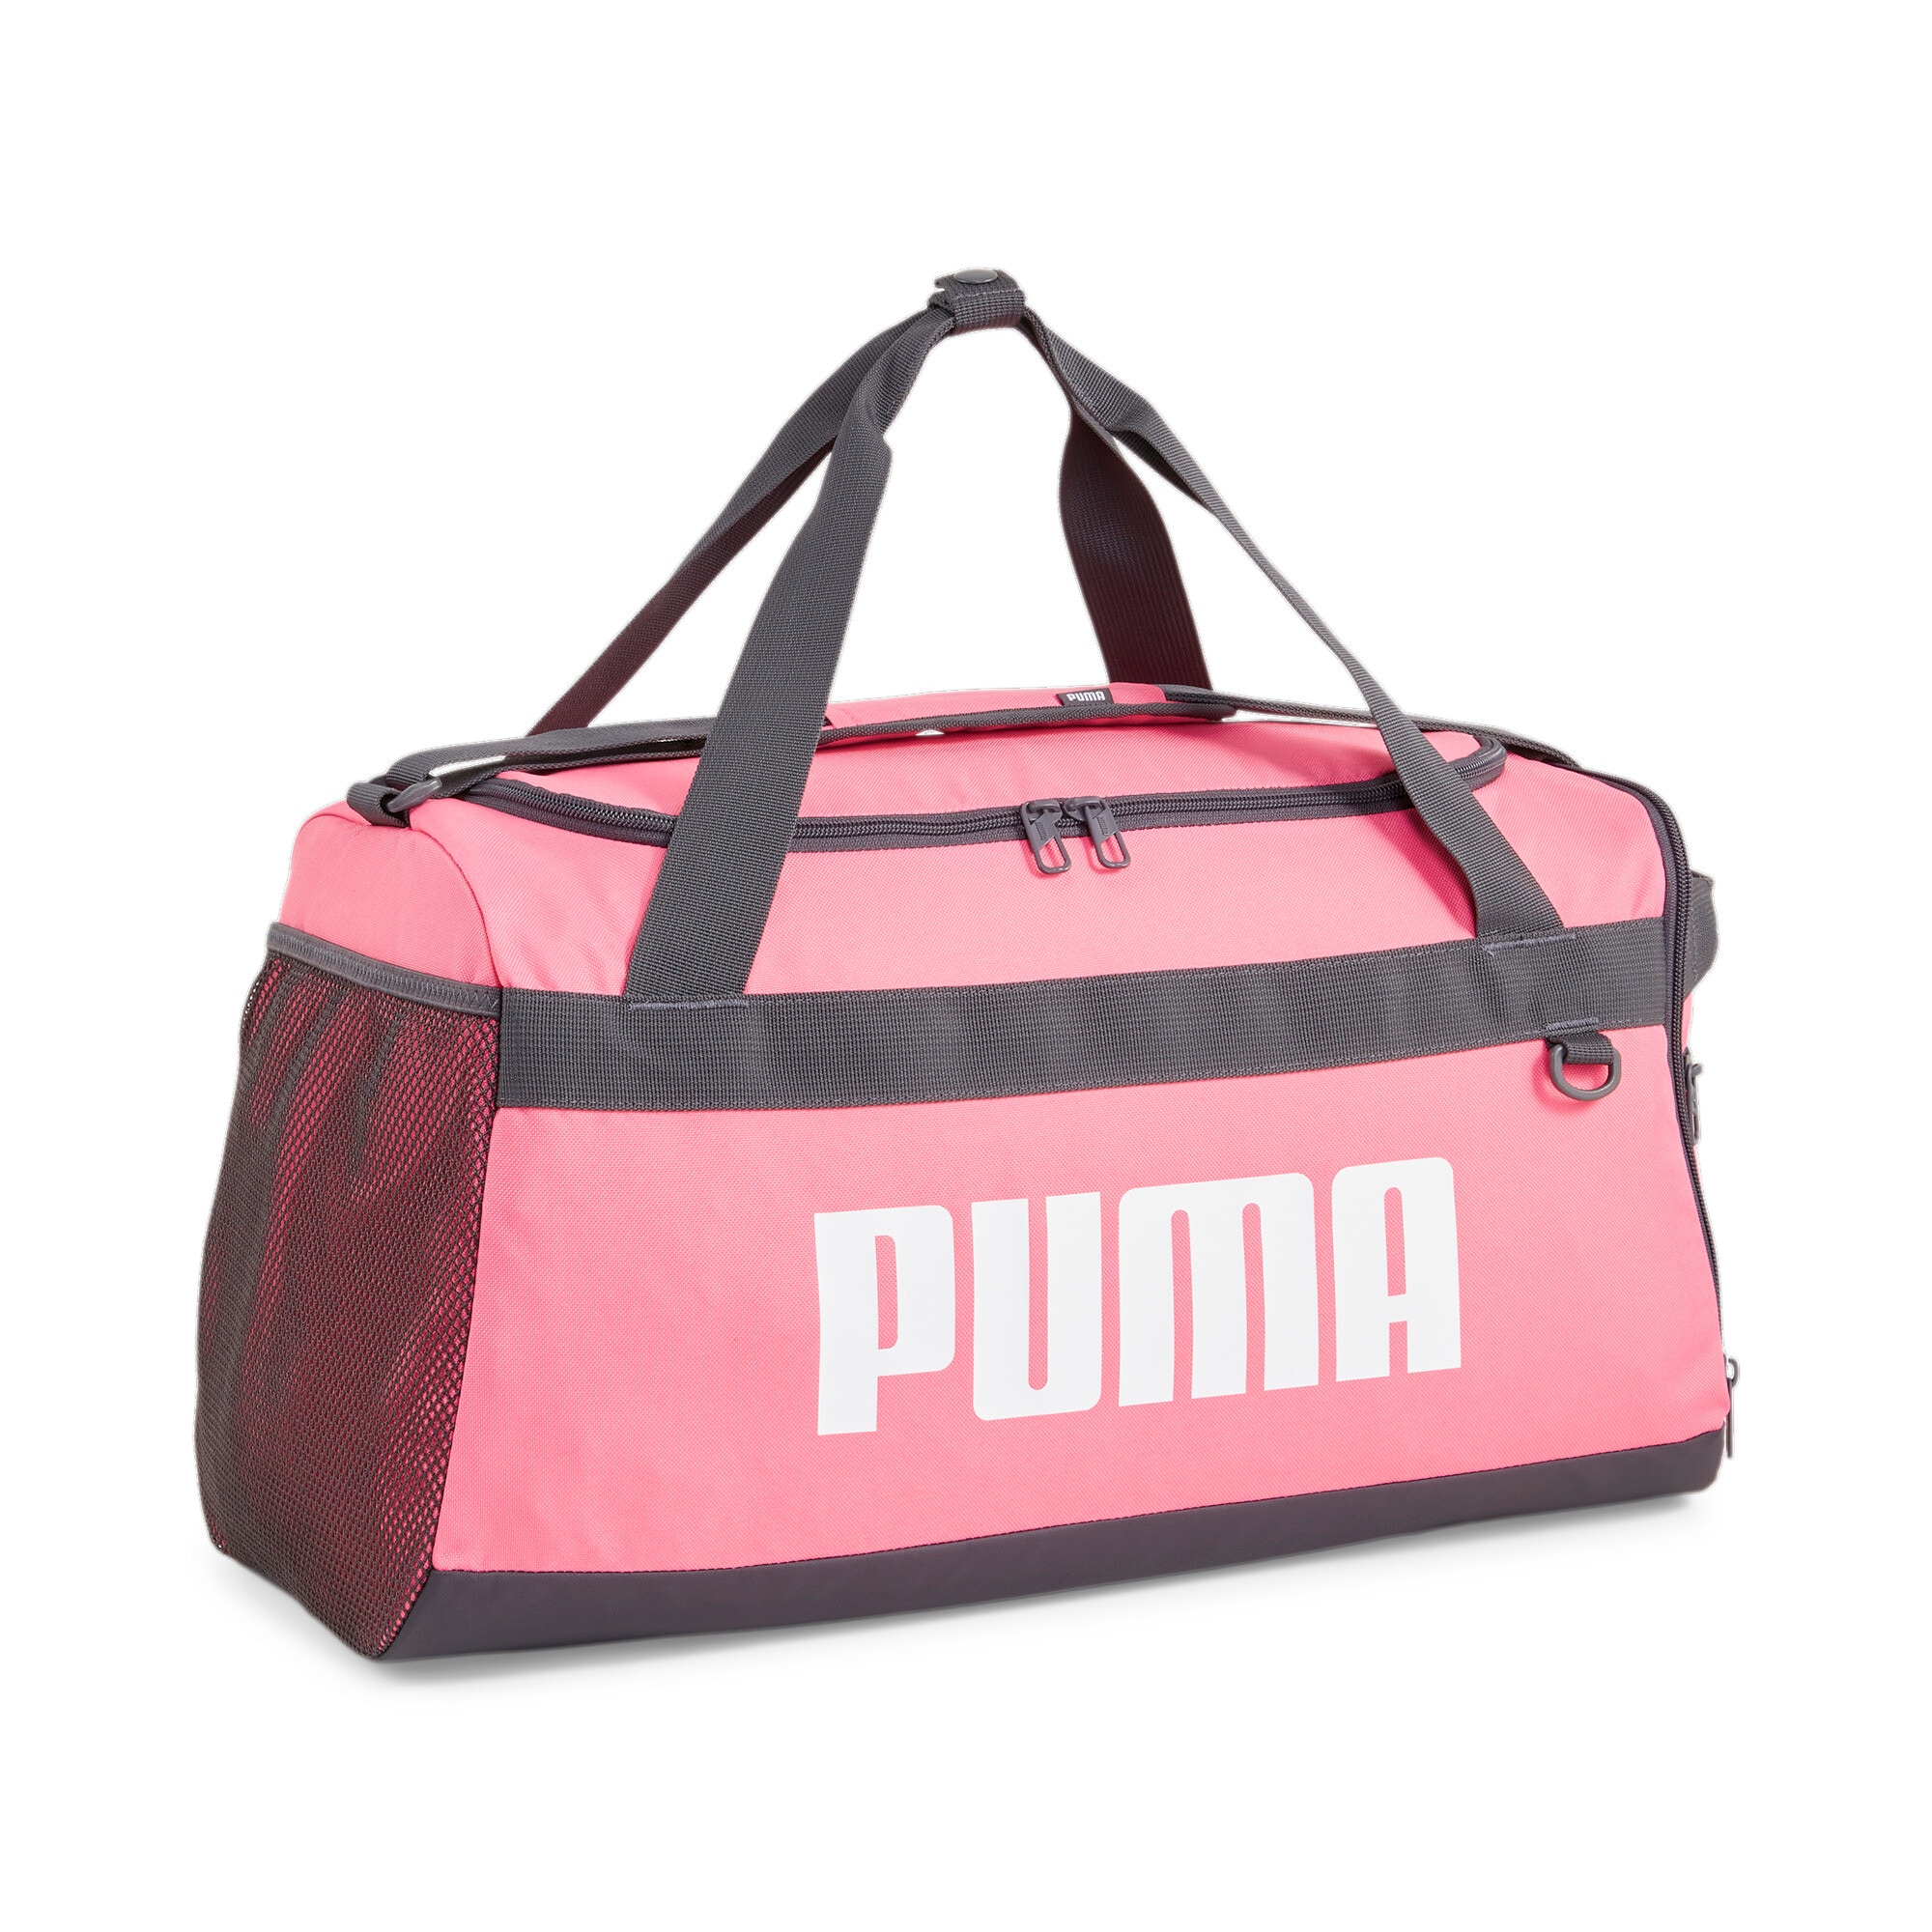  Challenger S Duffle Bag, Fast Pink